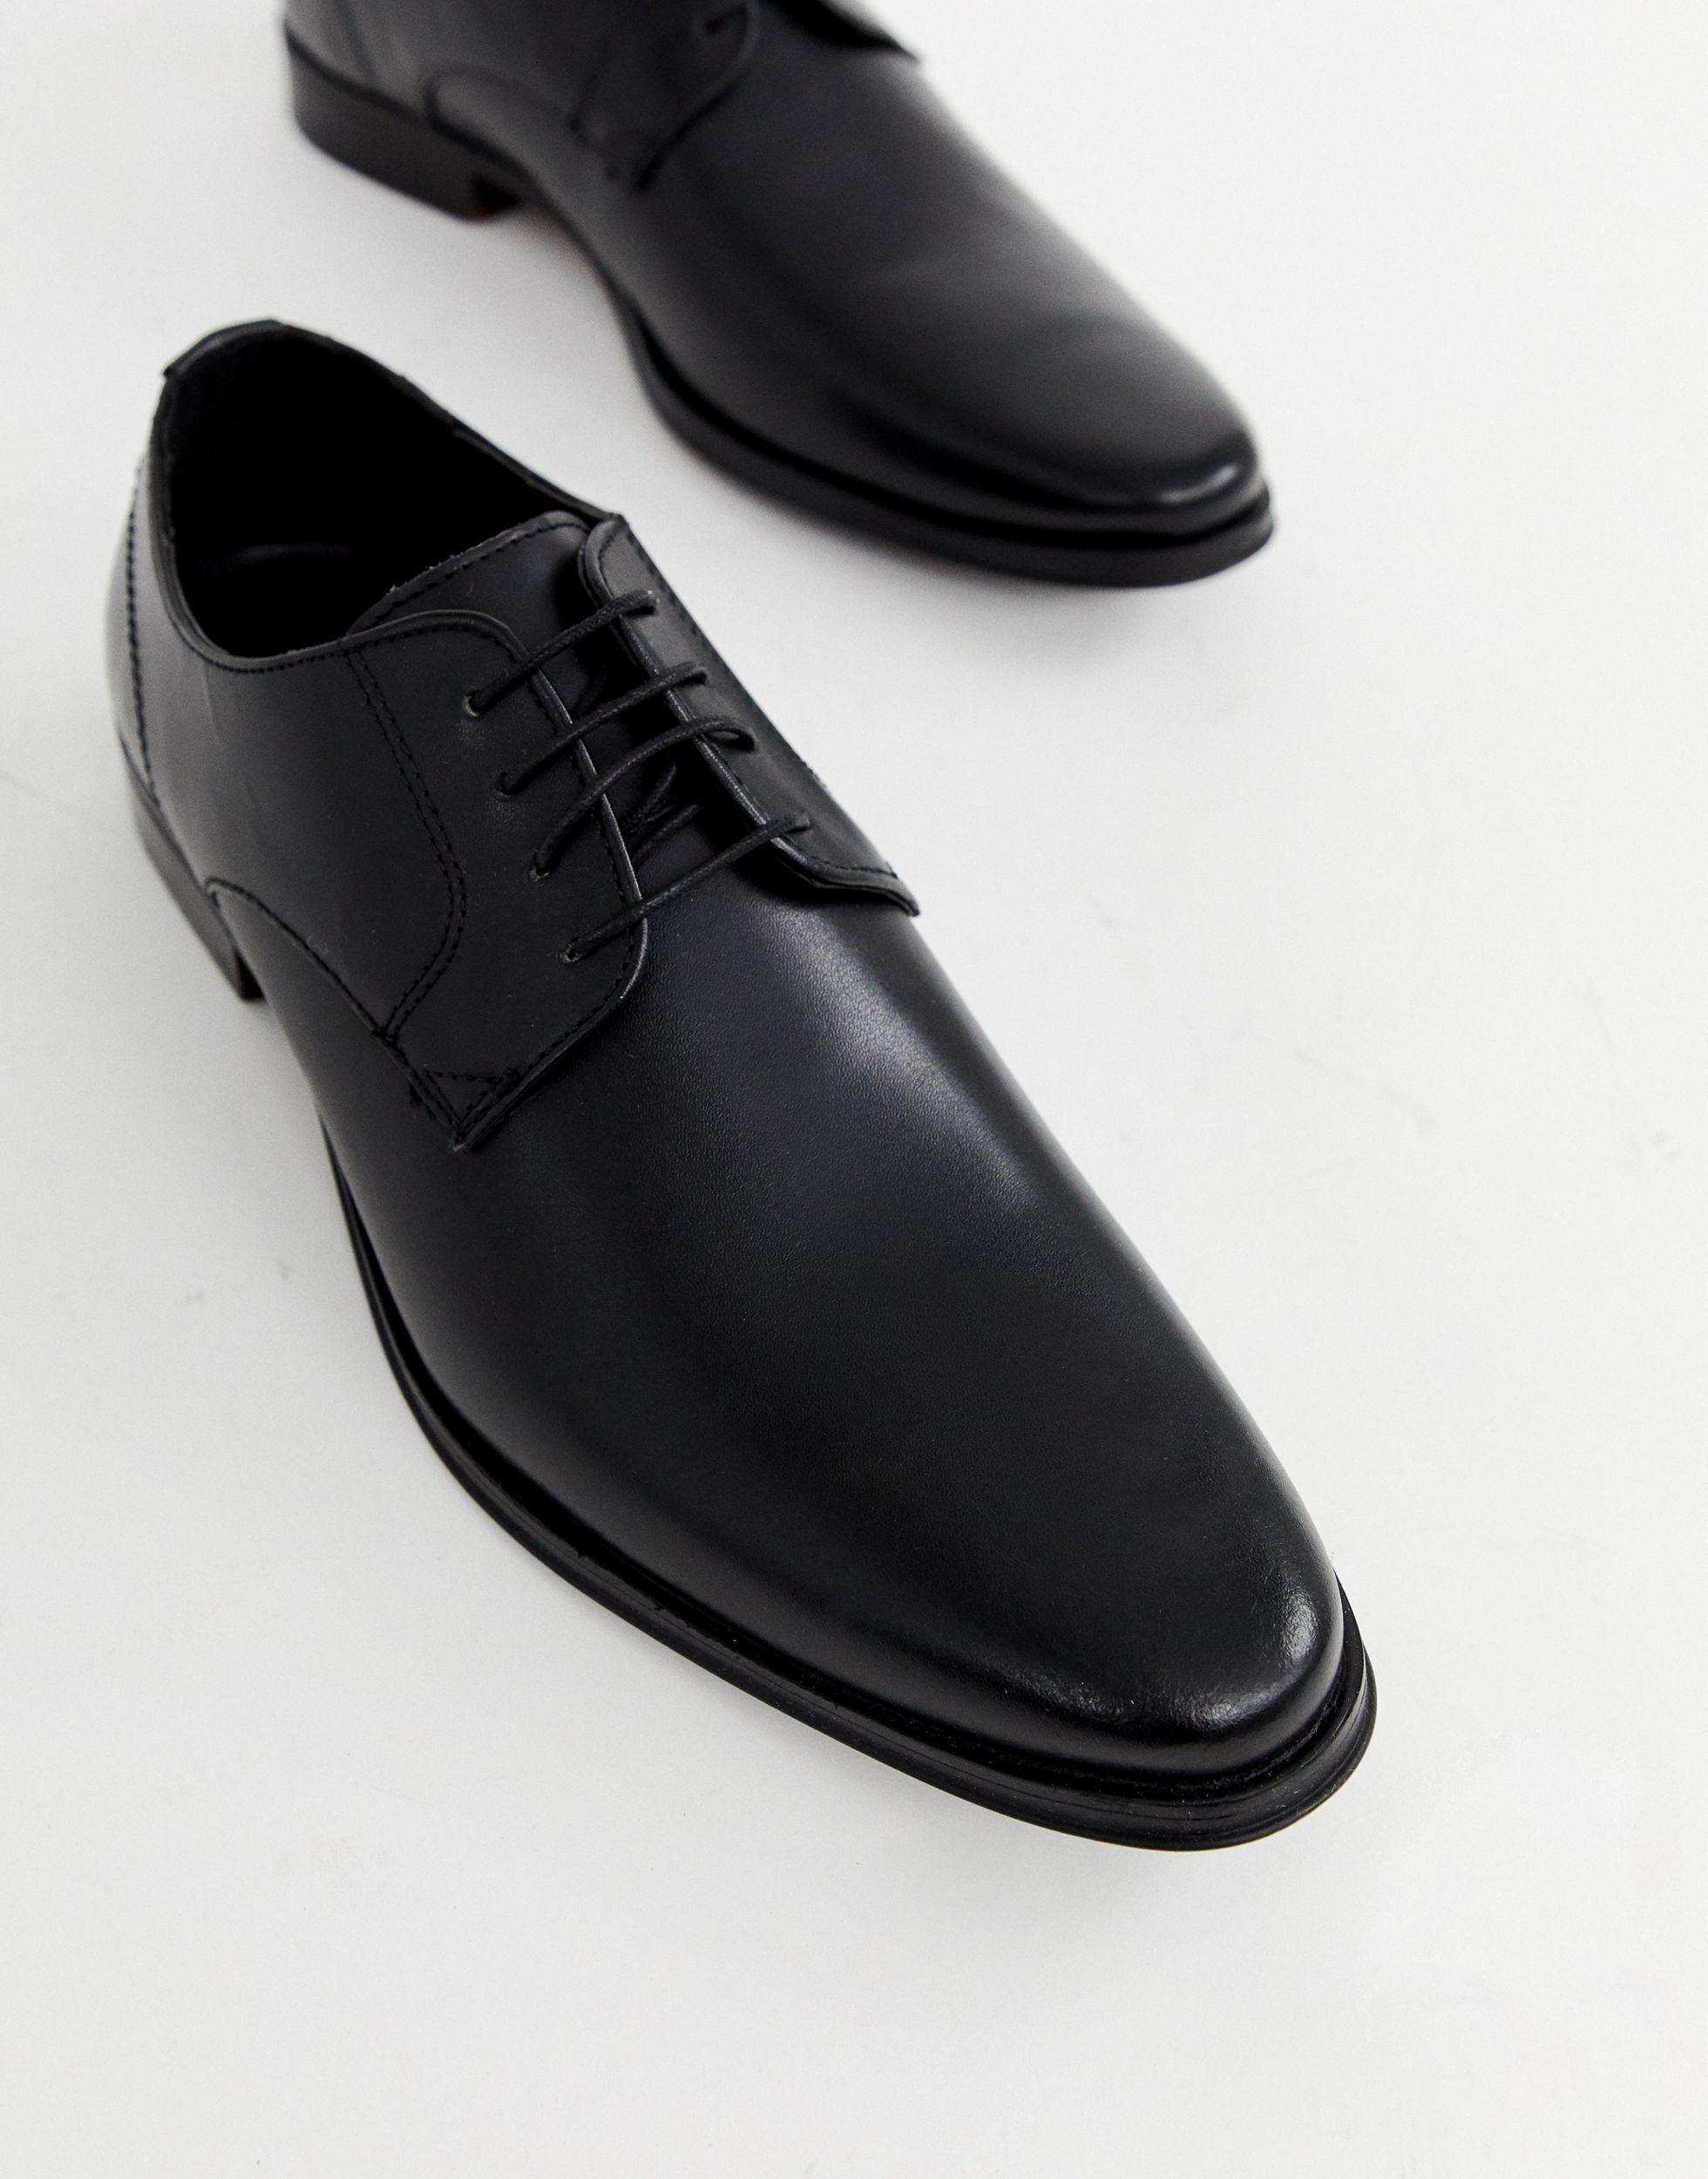 ASOS Leather Derby Shoes in Black for Men - Lyst